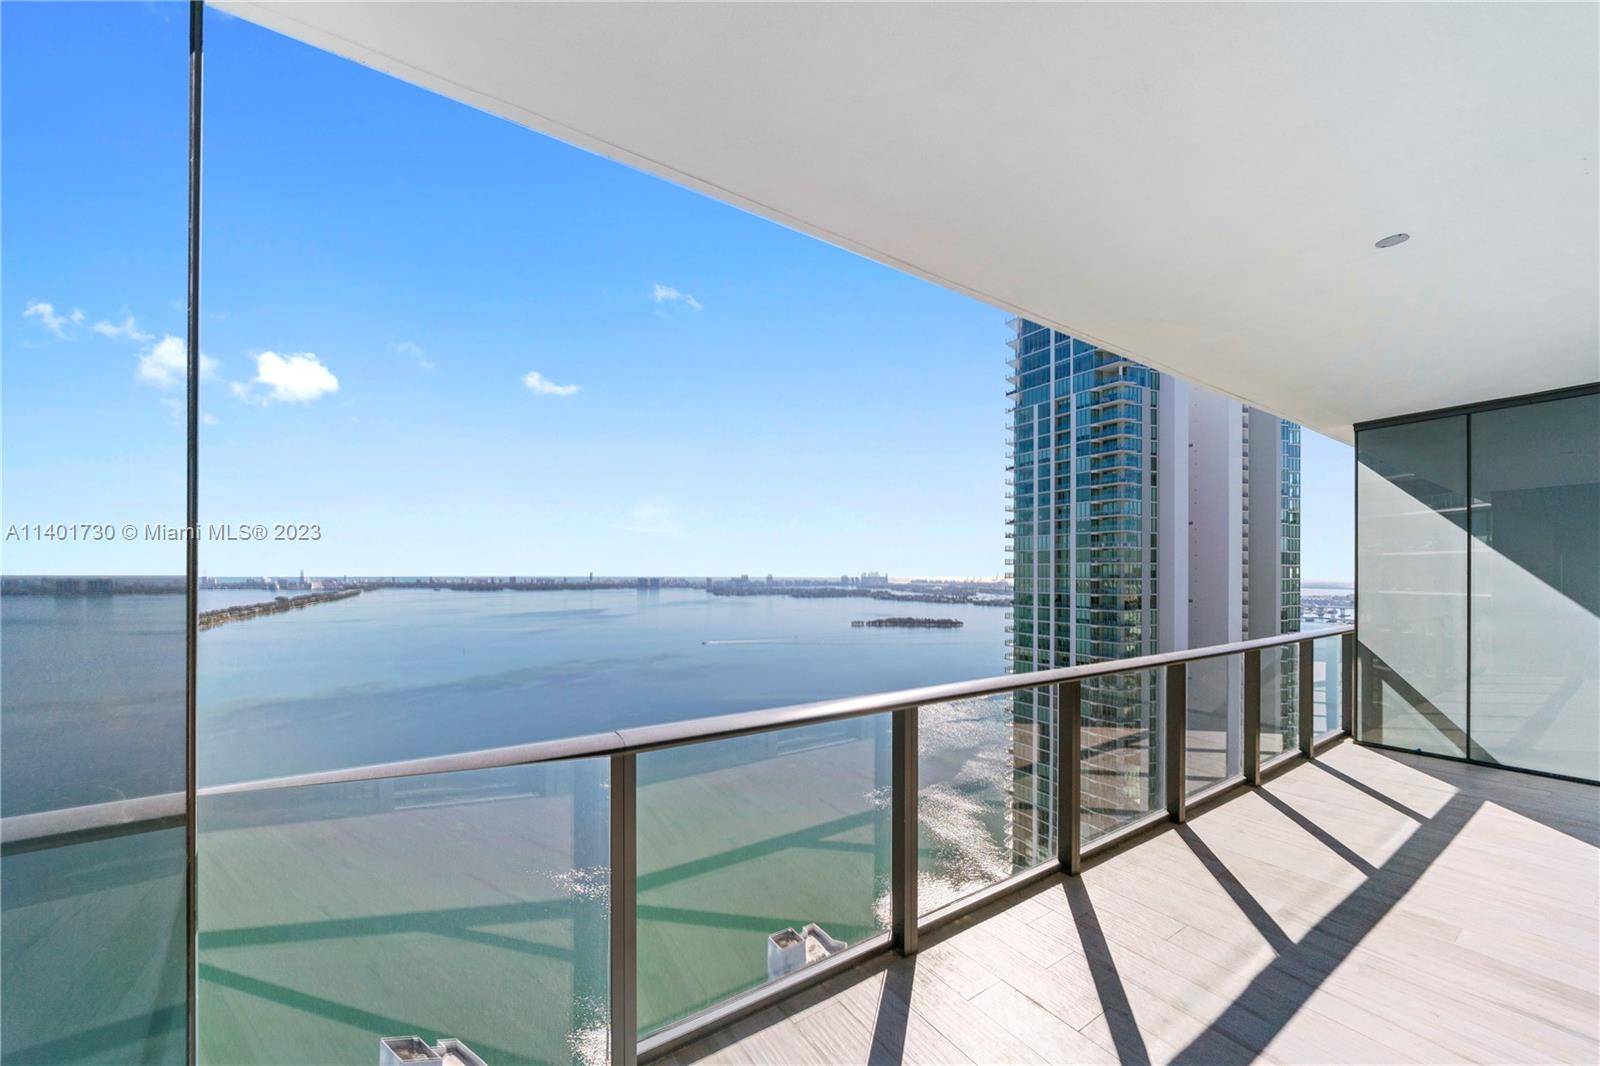 Very spacious 2 Bedrooms apartment, 3 bathrooms 209 sq ft of terrace facing Miami Beach, Biscayne Bay and the Atlantic Ocean !